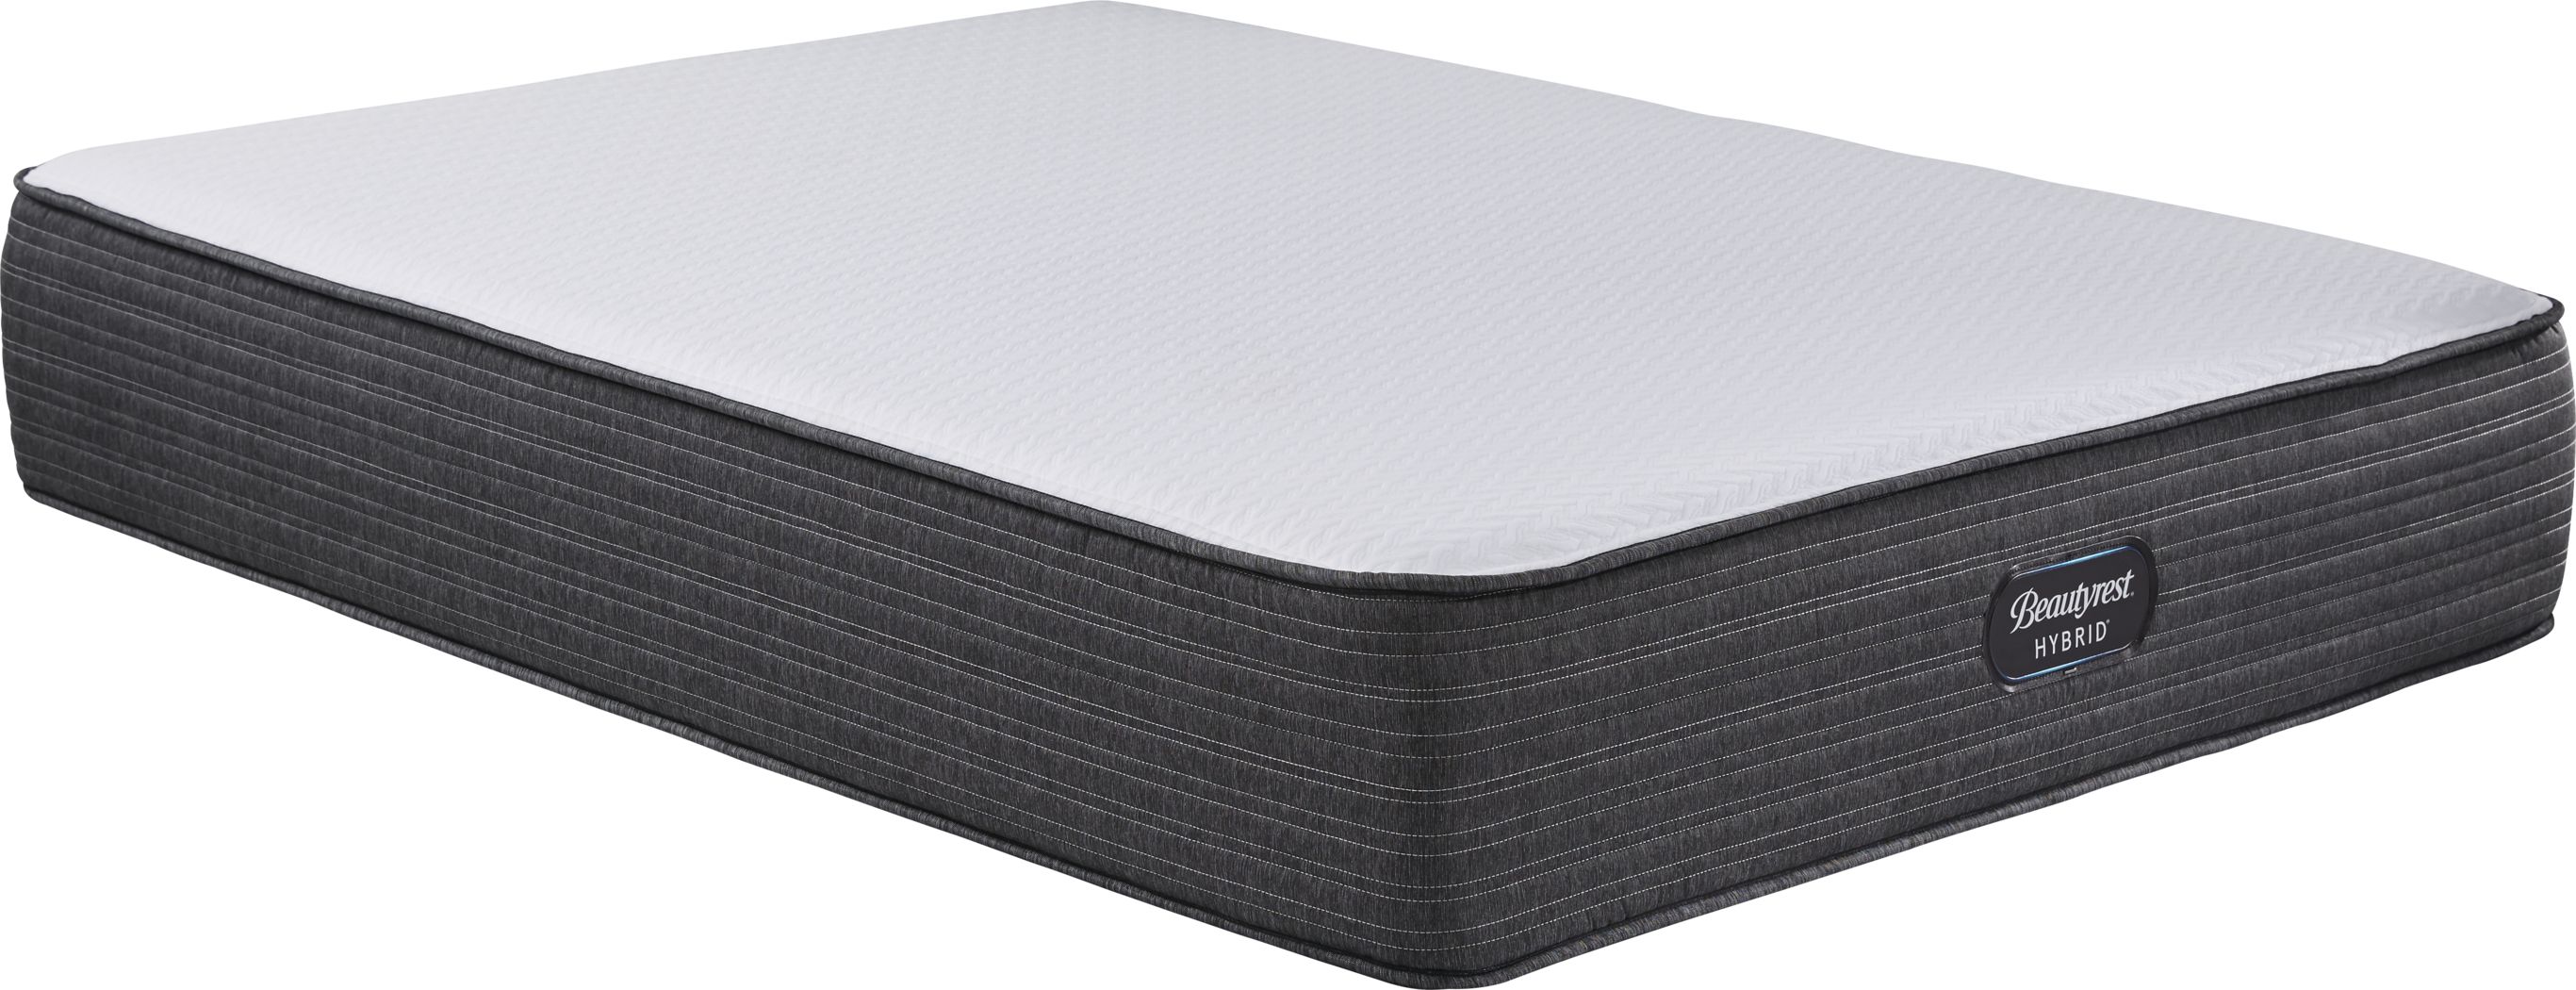 sterling collection king mattress wisconsin